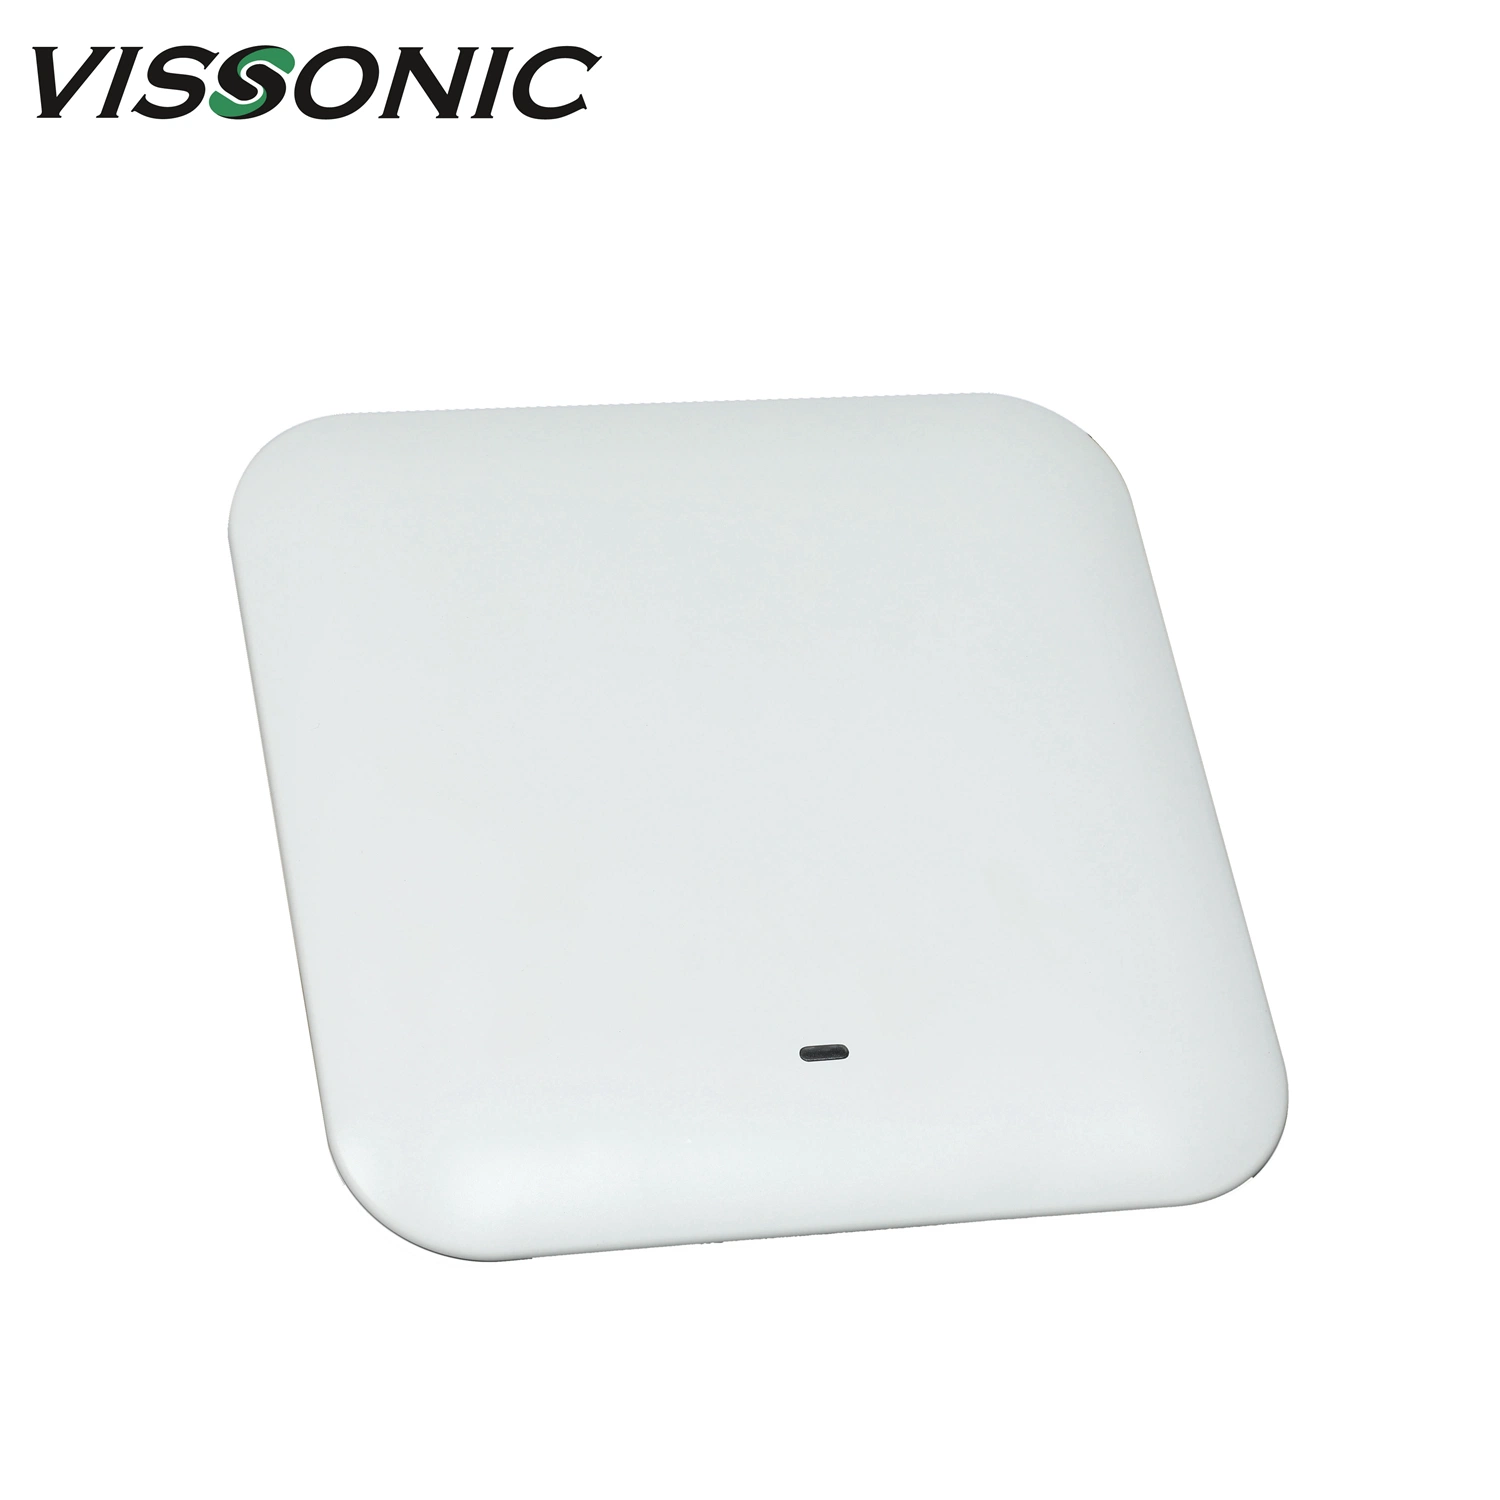 5GHz Wireless Conference System Access Point with Coverage Range 30m